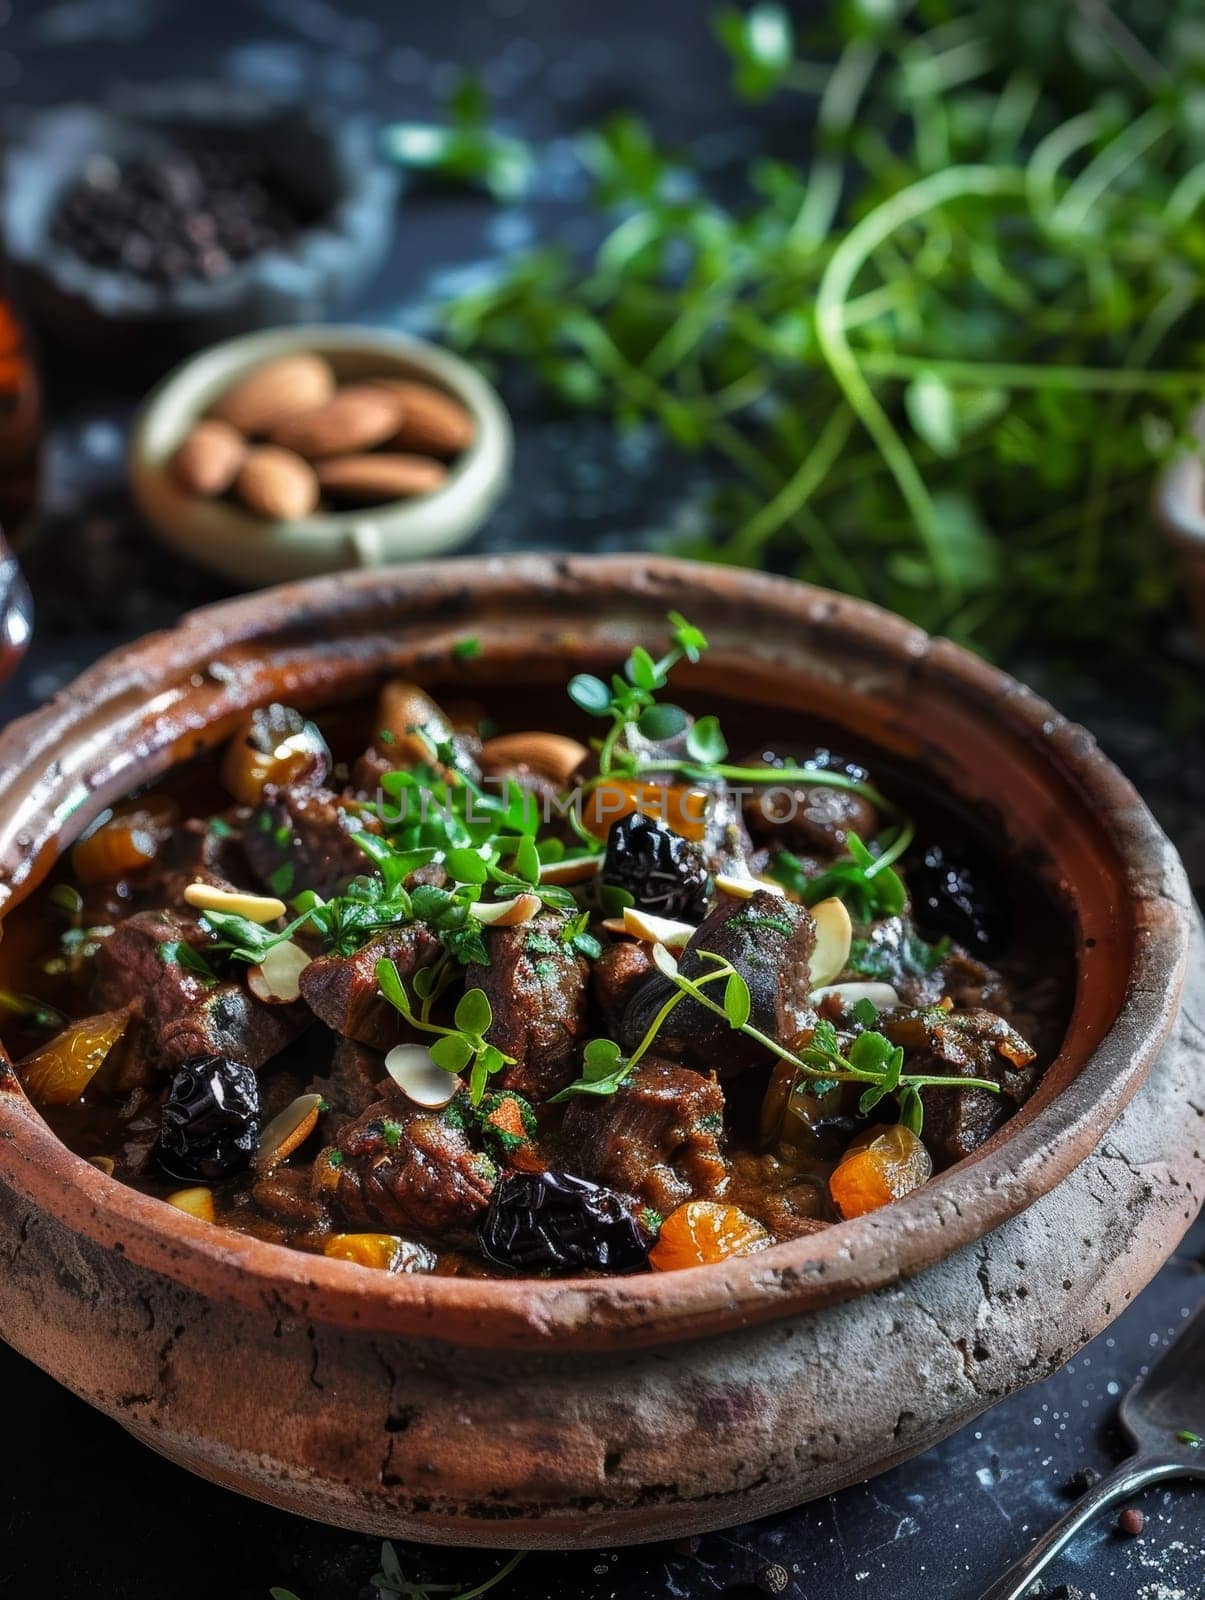 A traditional Moroccan tagine stew featuring tender lamb, sweet prunes, and crunchy almonds, slow-cooked to perfection in an authentic earthenware pot and garnished with fresh, fragrant herbs